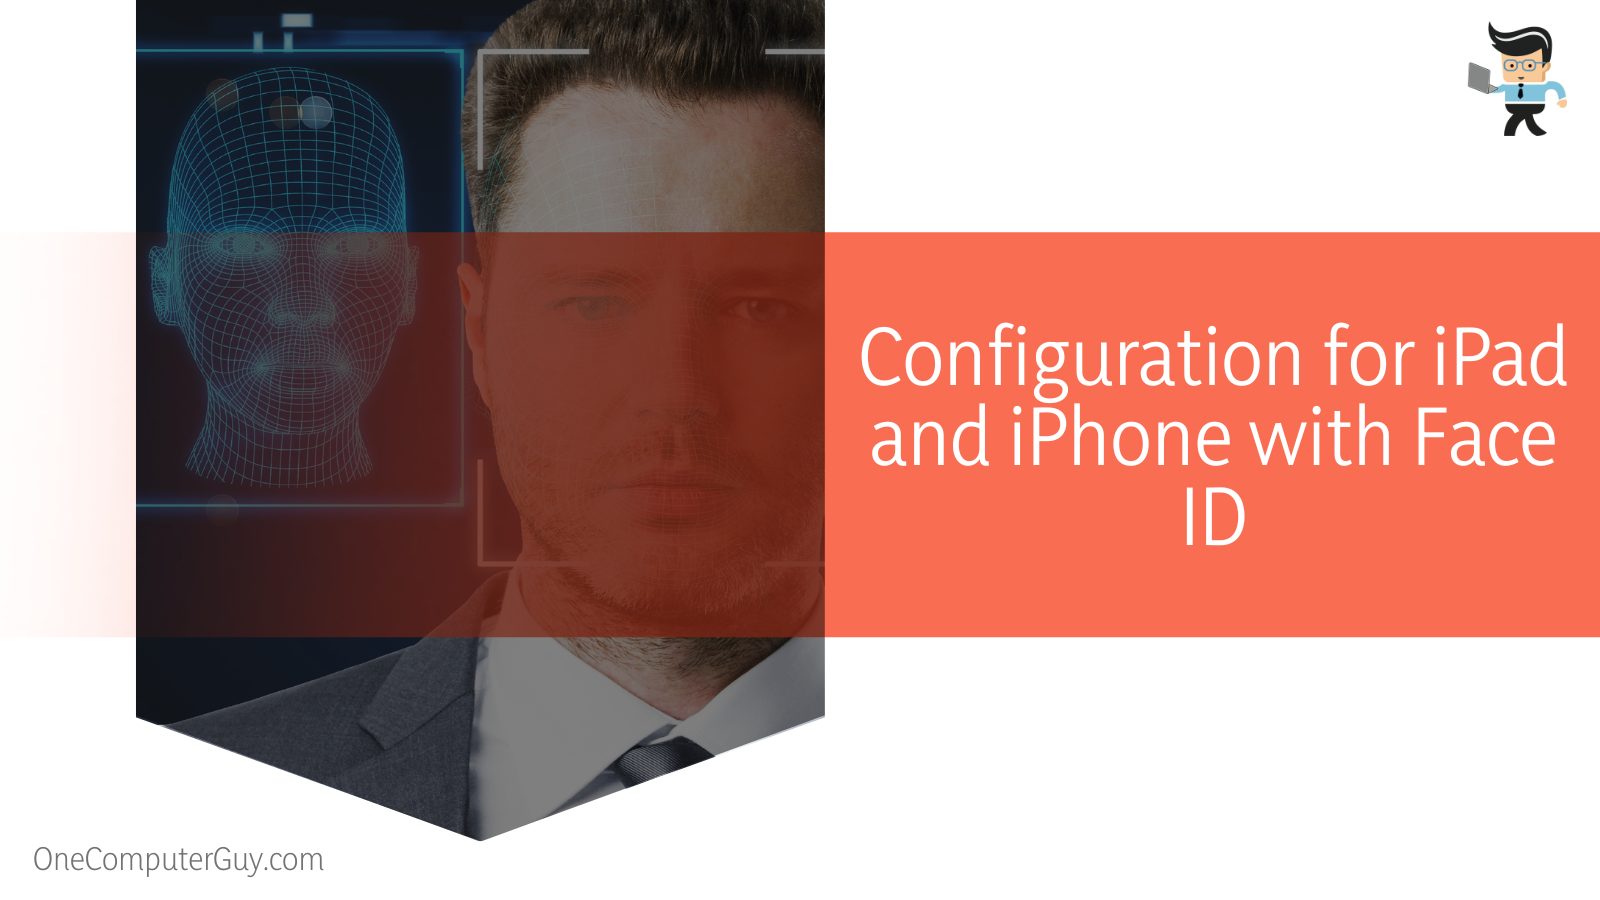 Configuration for iPad and iPhone with Face ID